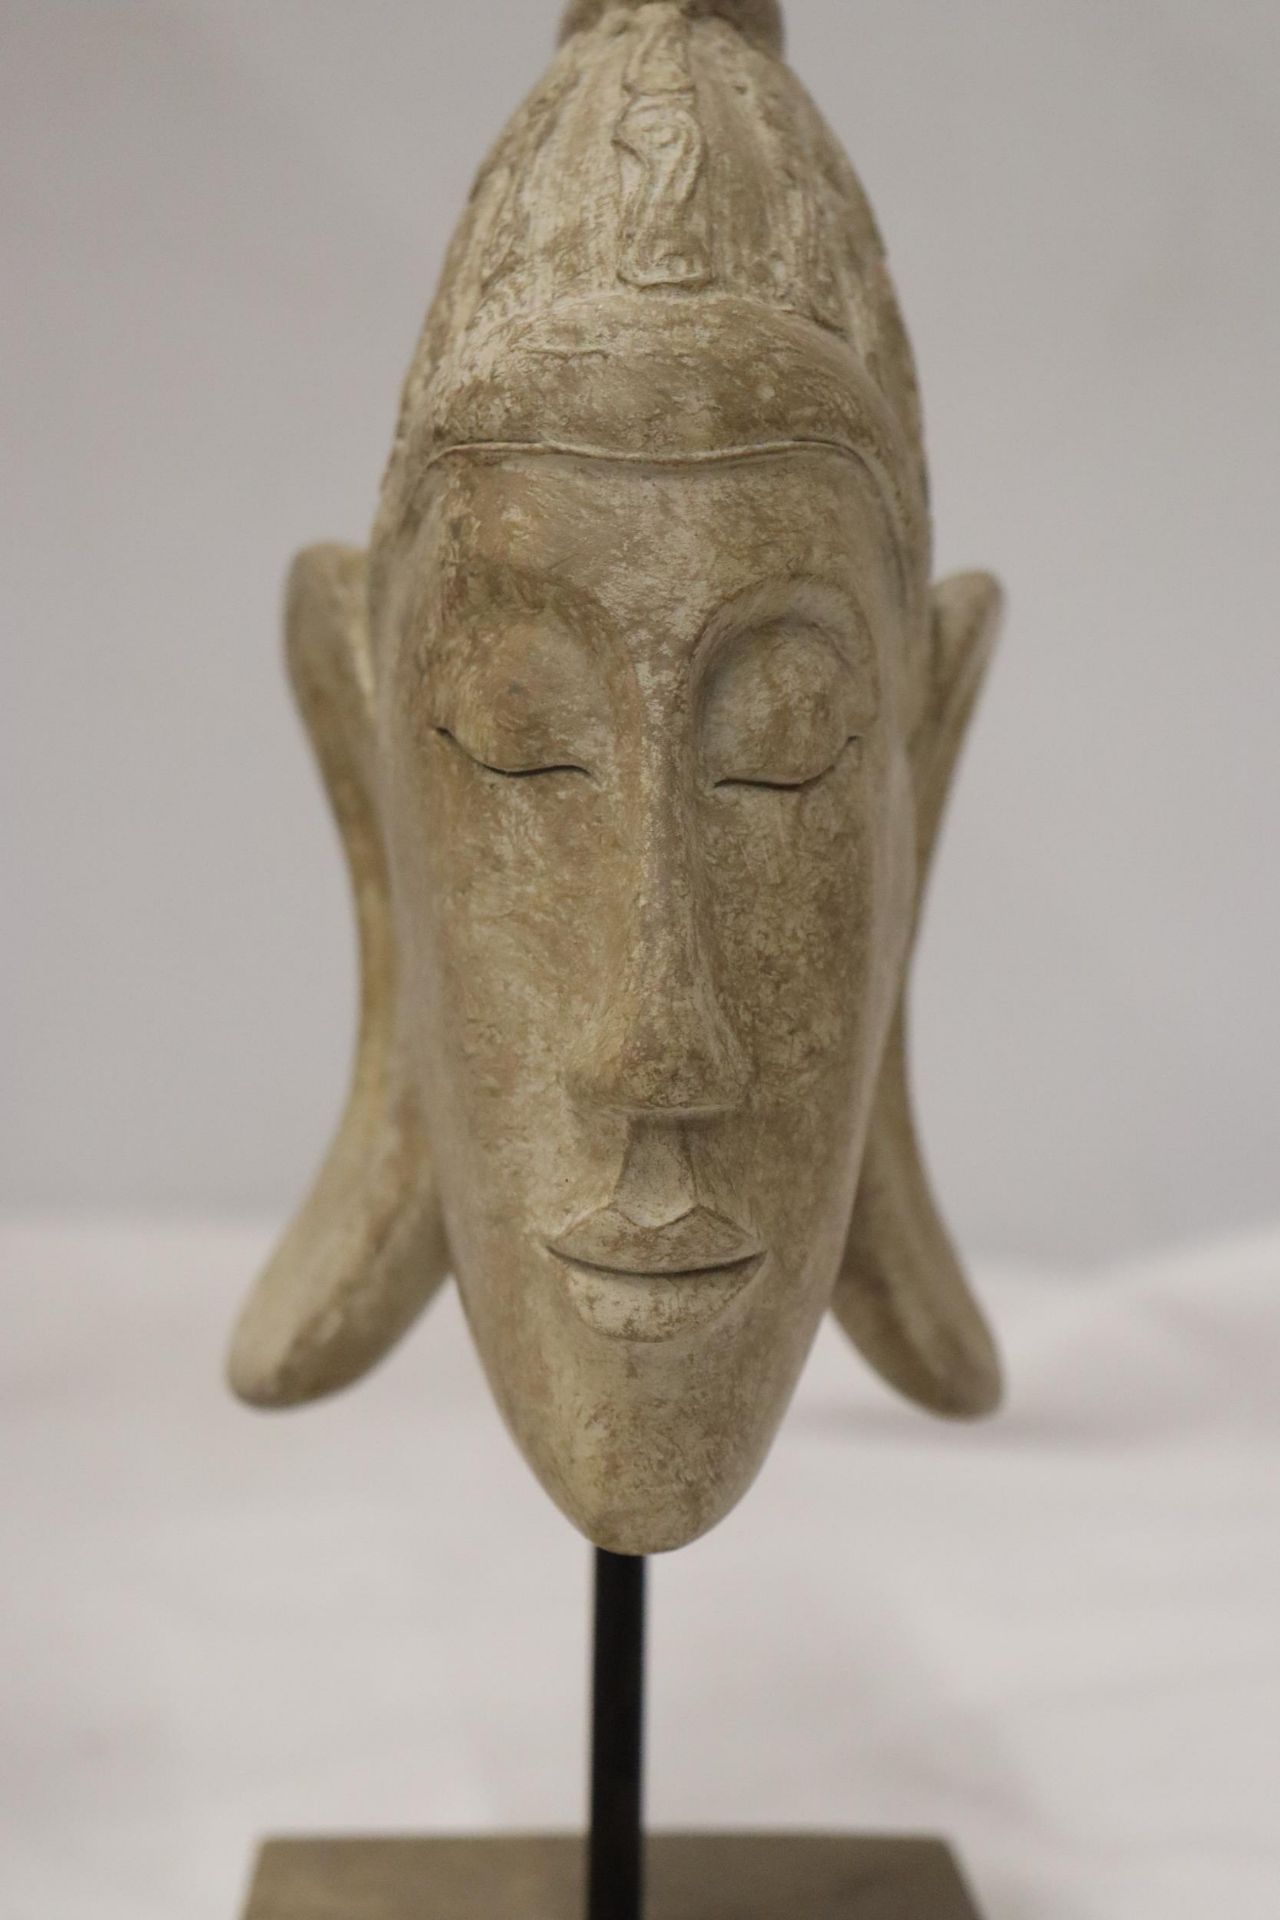 TWO BUDDAH HEADS ON STANDS, HEIGHT 27CM - Image 6 of 7